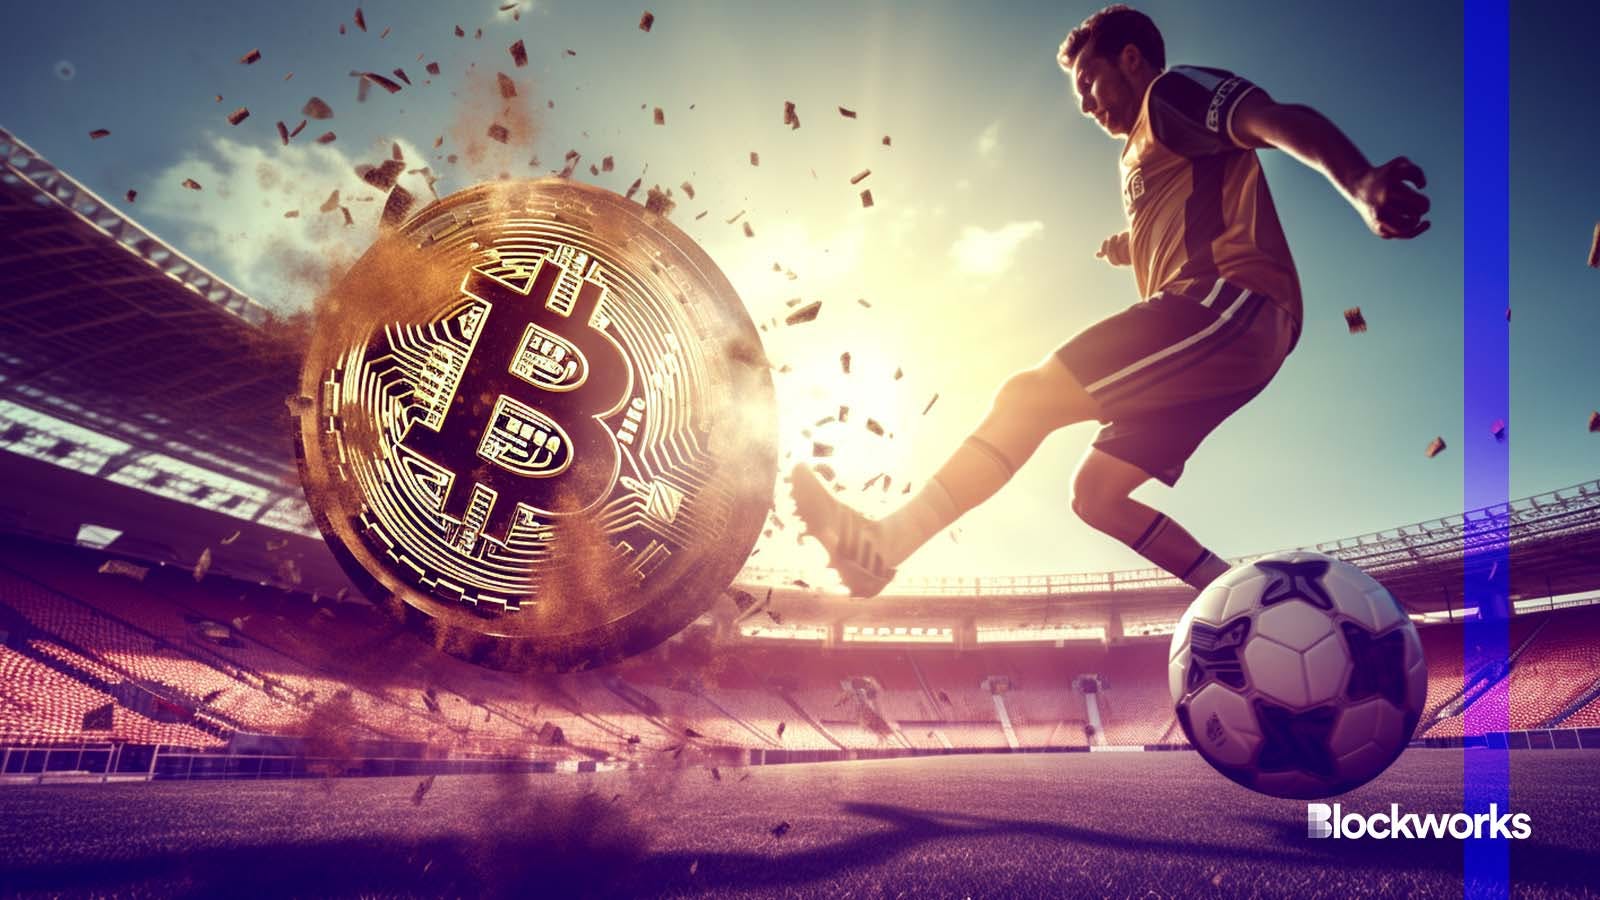 Crypto Sports Betting Software Development Services